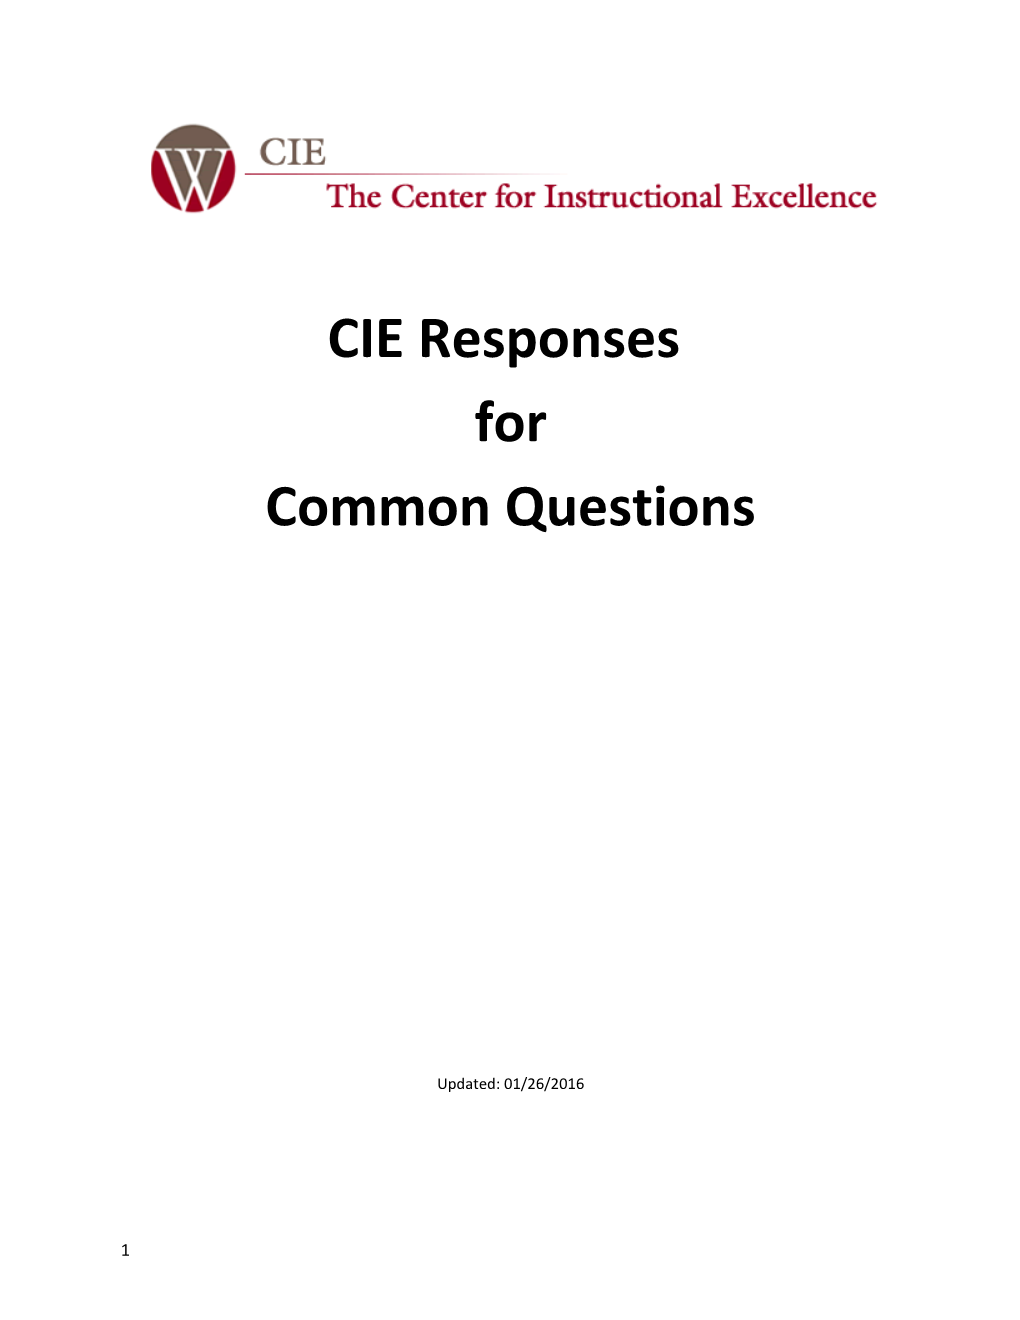 CIE Responses for Common Questions